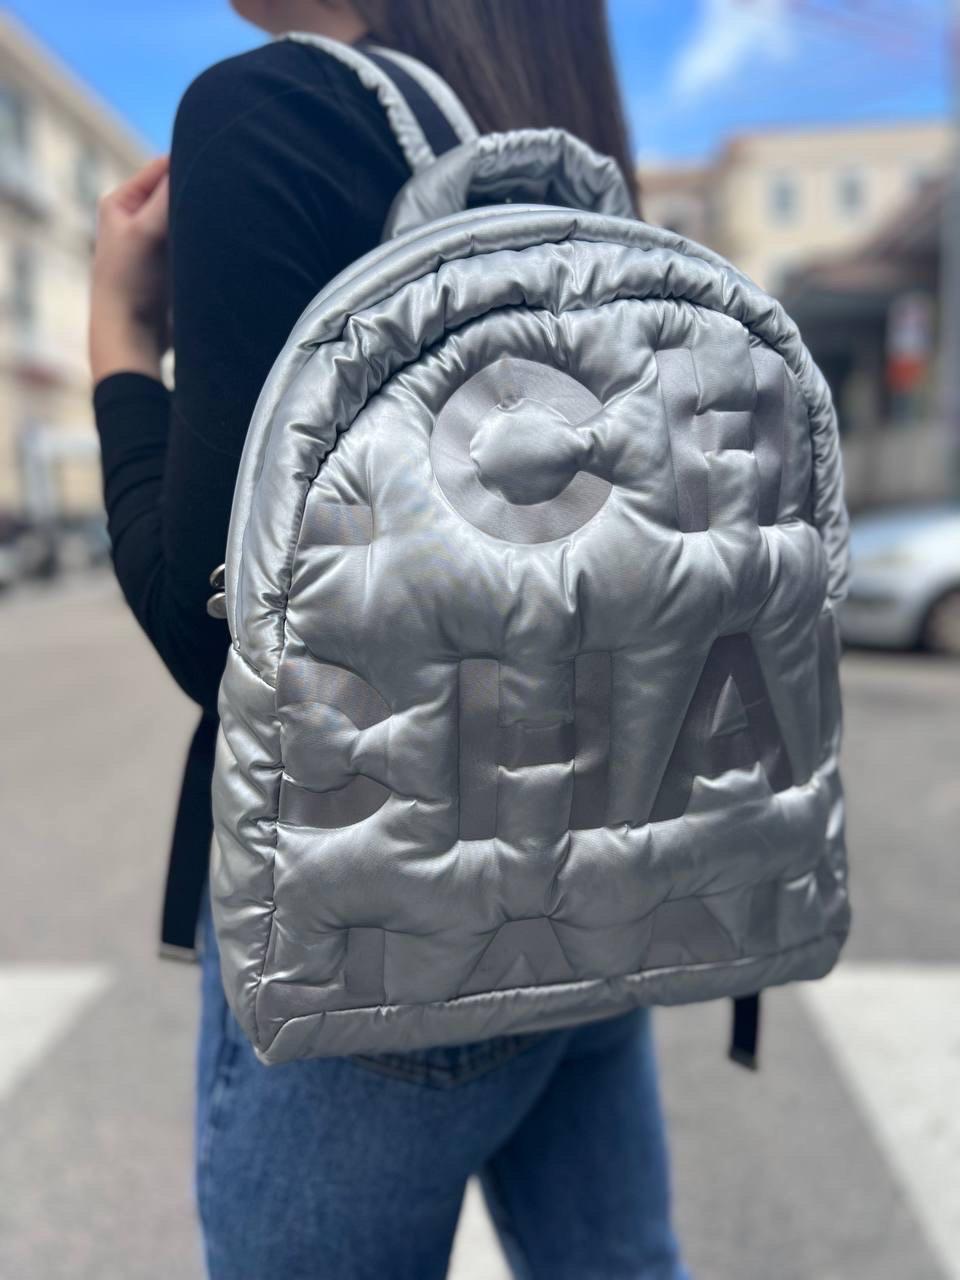 Chanel padded backpack, Doudone model, made of silver-colored nylon with black fabric trim, ''CHANEL'' logo and silver hardware. Equipped with a double zip closure, internally lined in black nylon, very roomy. Equipped with double adjustable padded